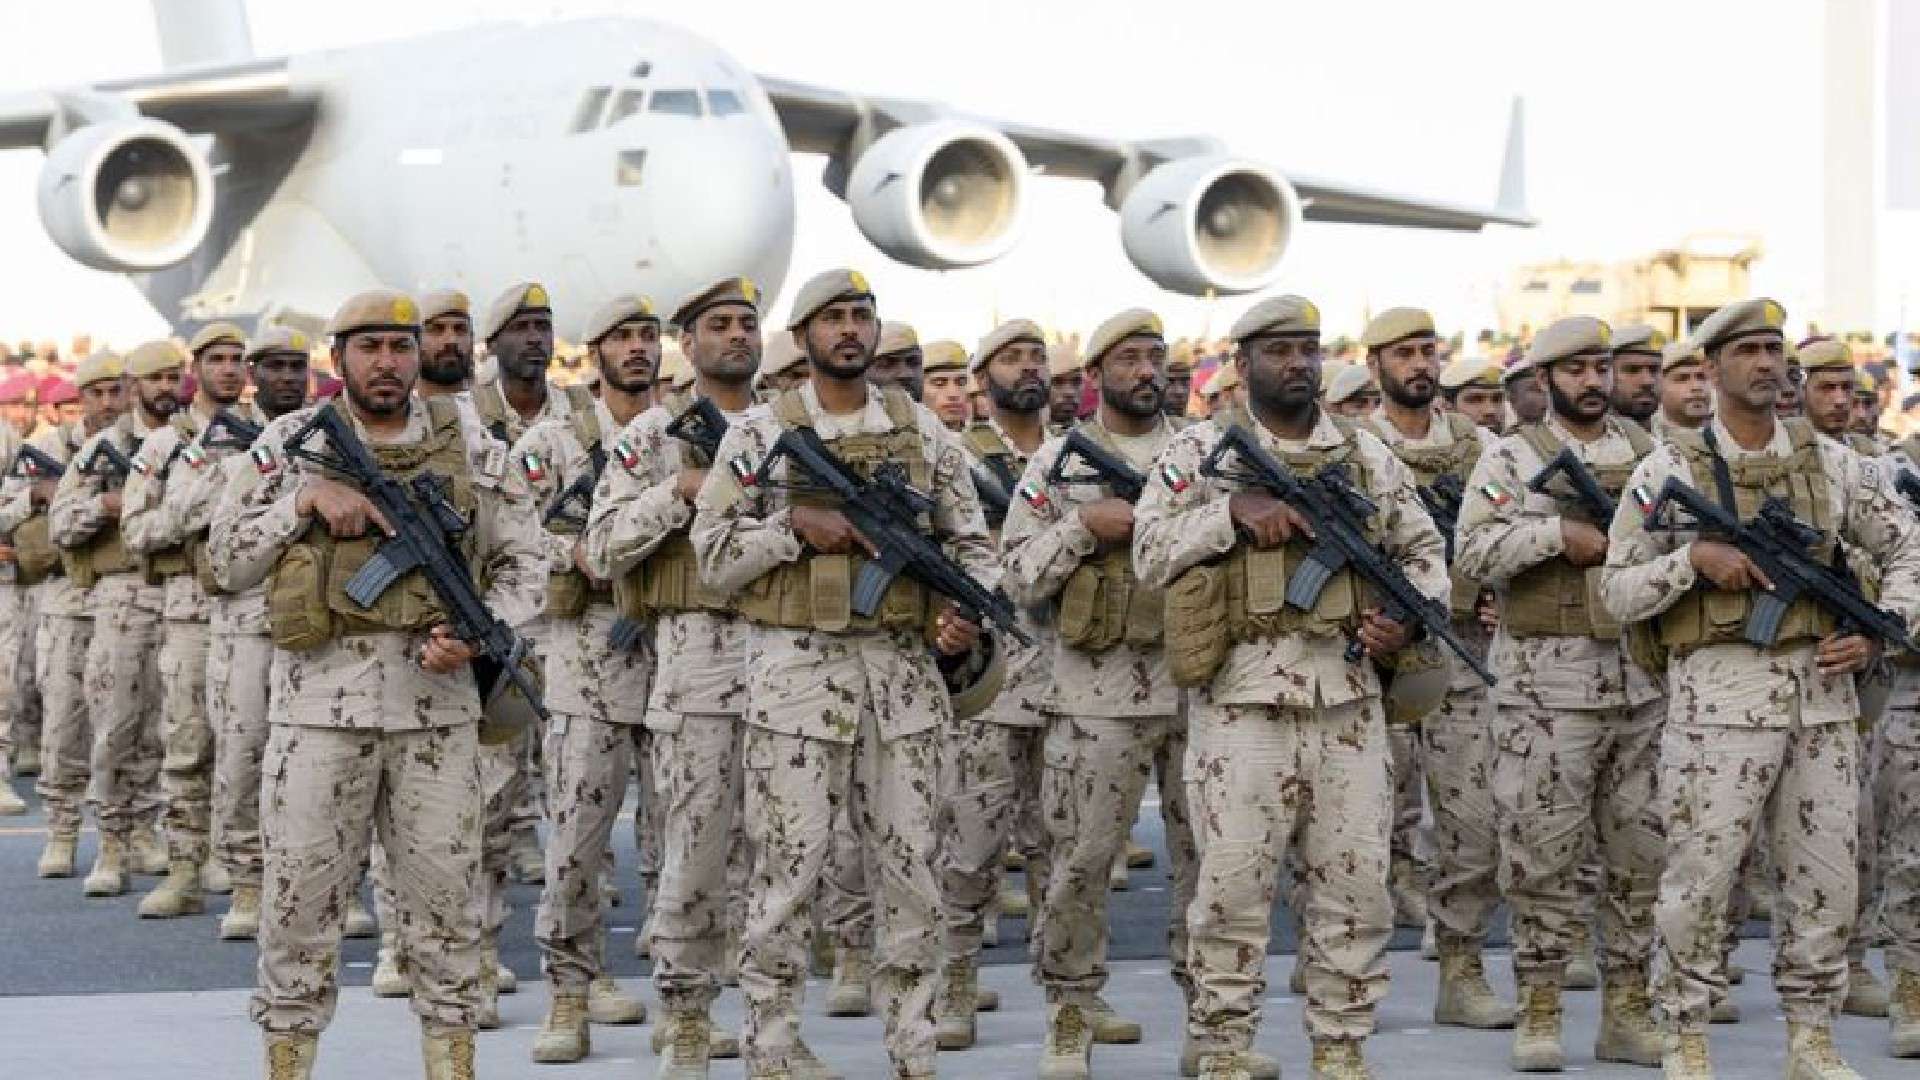 UAE Army job requirements for foreigners - Army Soldiers